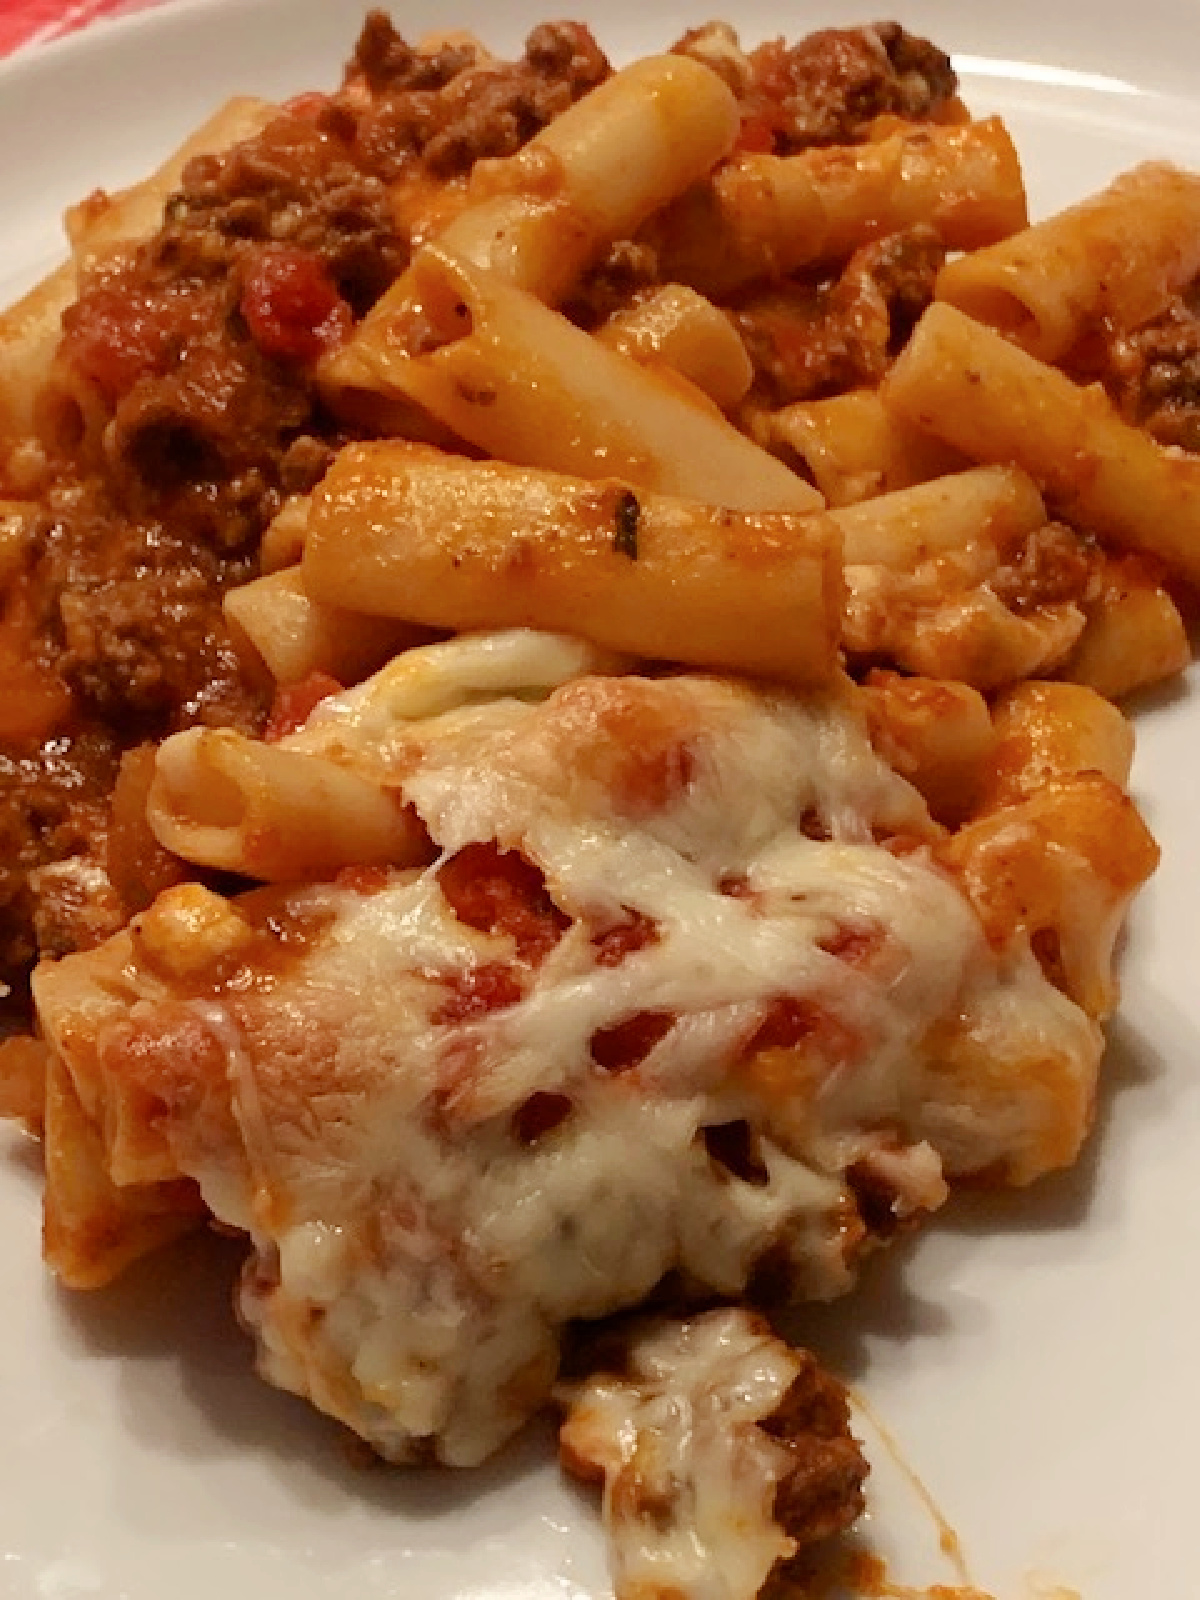 A serving of baked ziti on a white plate.